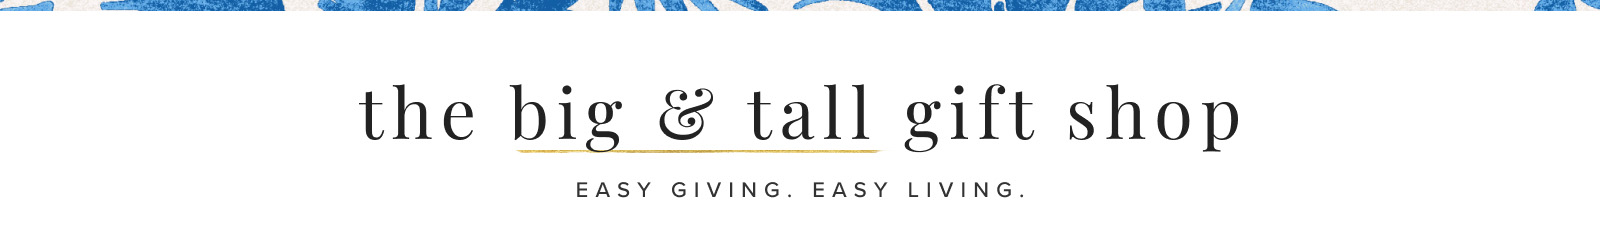 The Big & Tall Gift Shop: Easy Giving, Easy Living